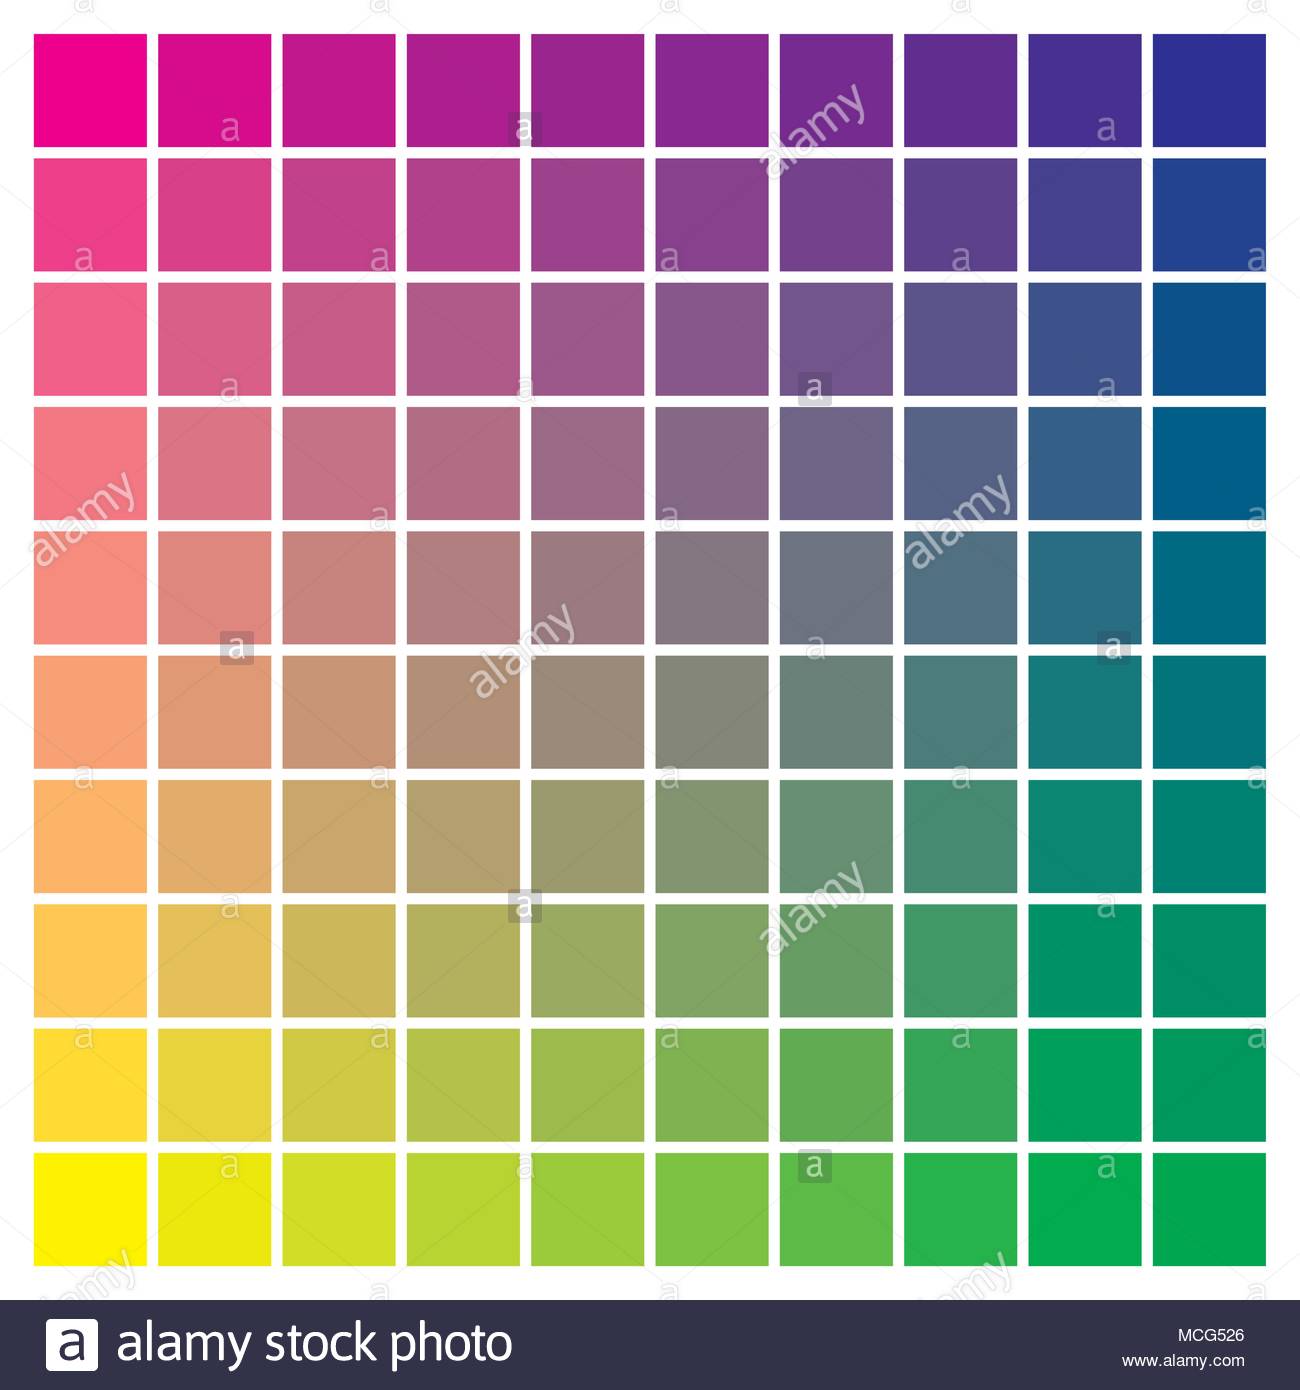 Cmyk Colour Chart For Printing